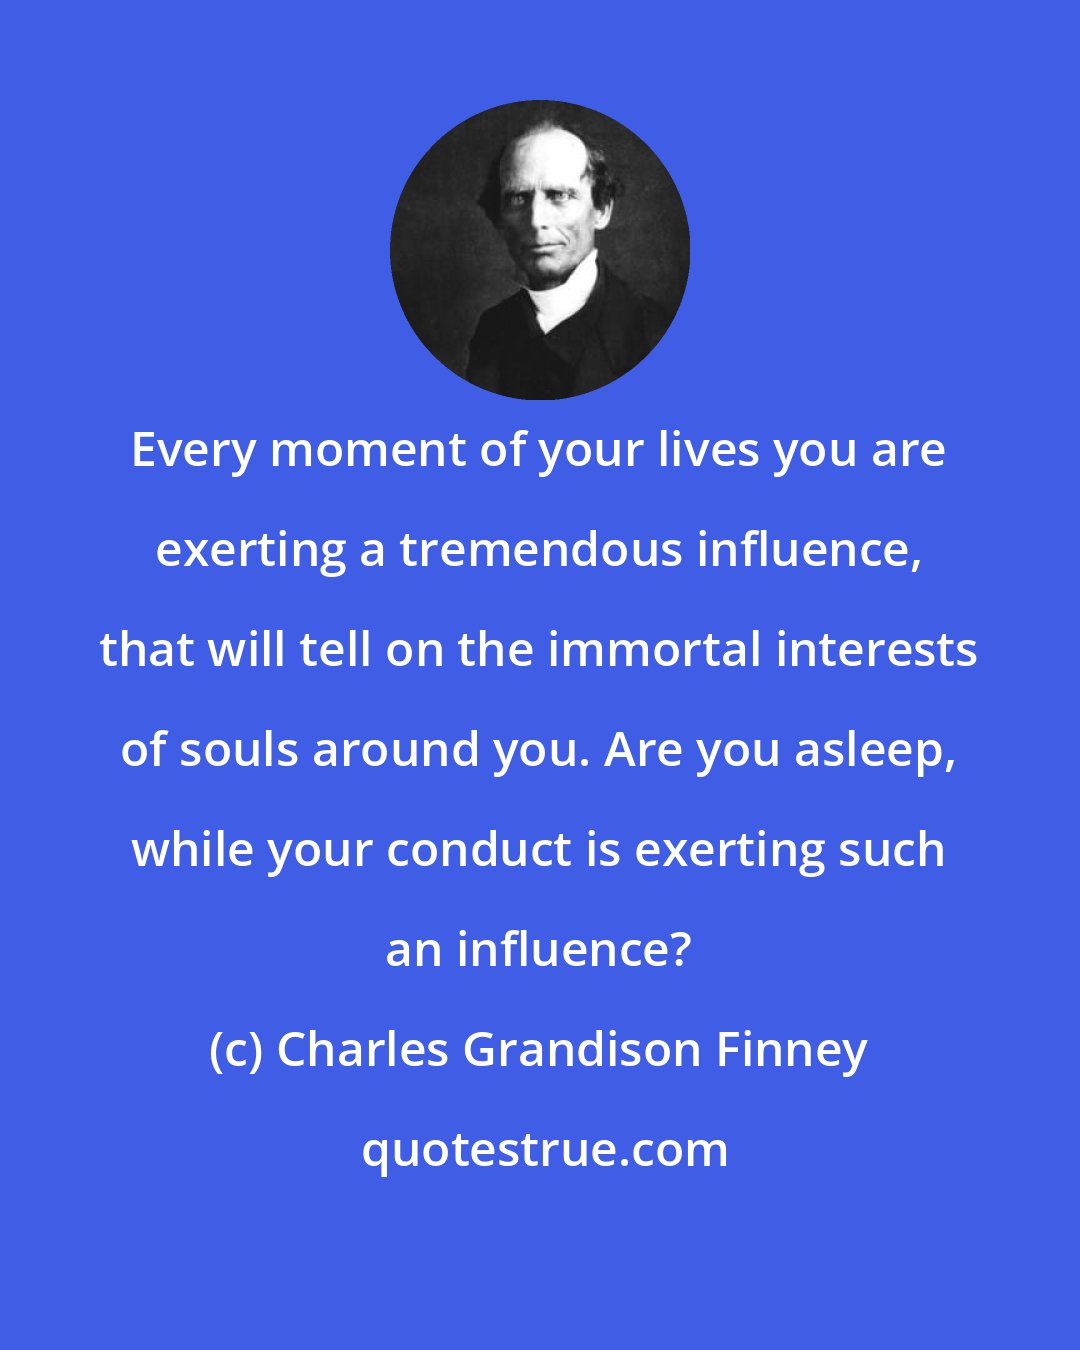 Charles Grandison Finney: Every moment of your lives you are exerting a tremendous influence, that will tell on the immortal interests of souls around you. Are you asleep, while your conduct is exerting such an influence?